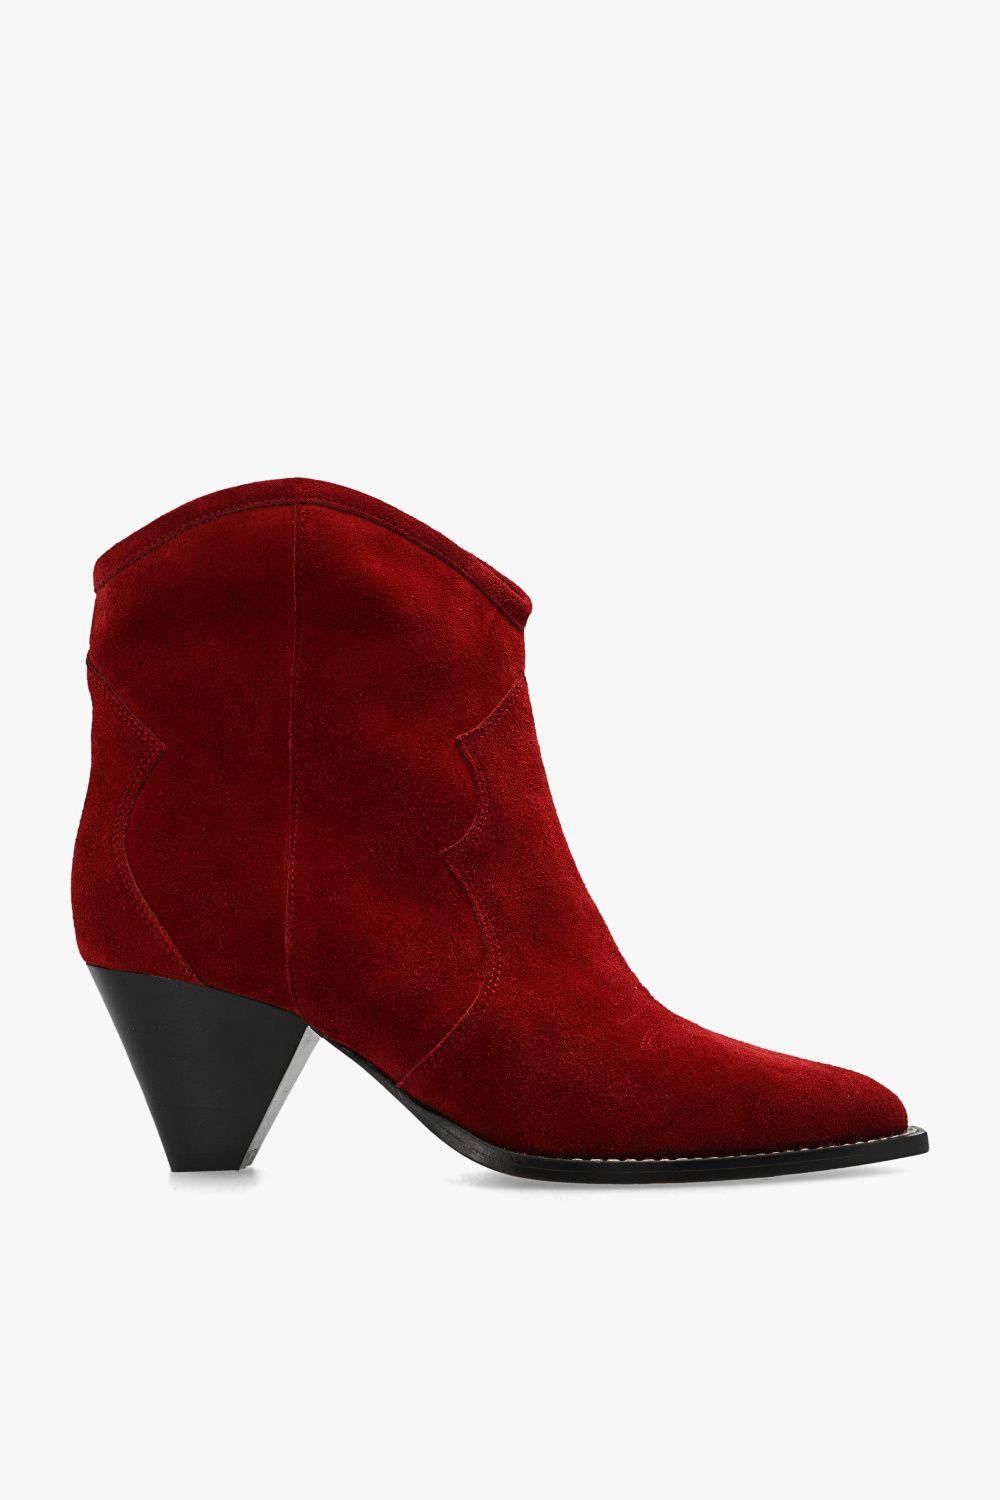 Isabel Marant 'darizo' Heeled Ankle Boots in Red | Lyst